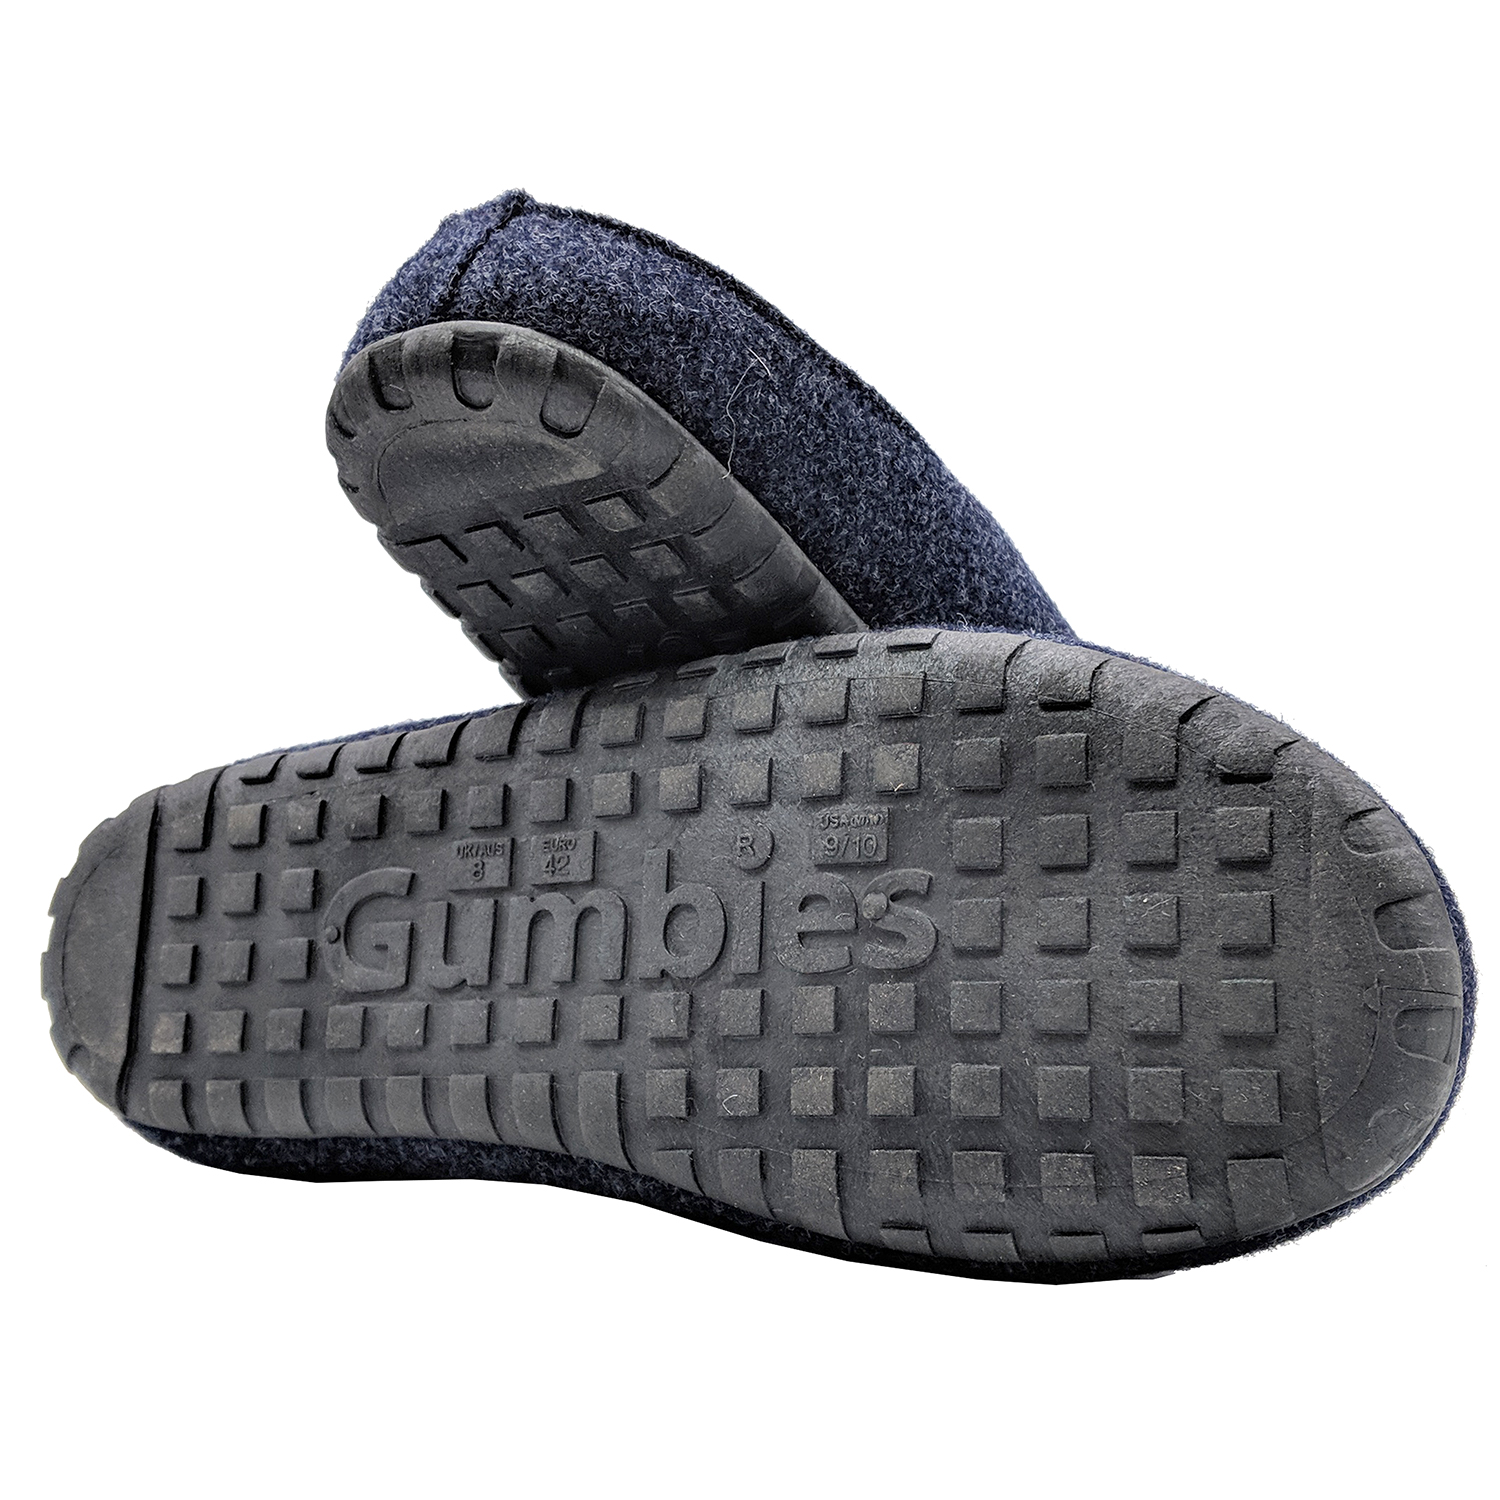 GUMBIES – Outback Slipper, NAVY-GREY 